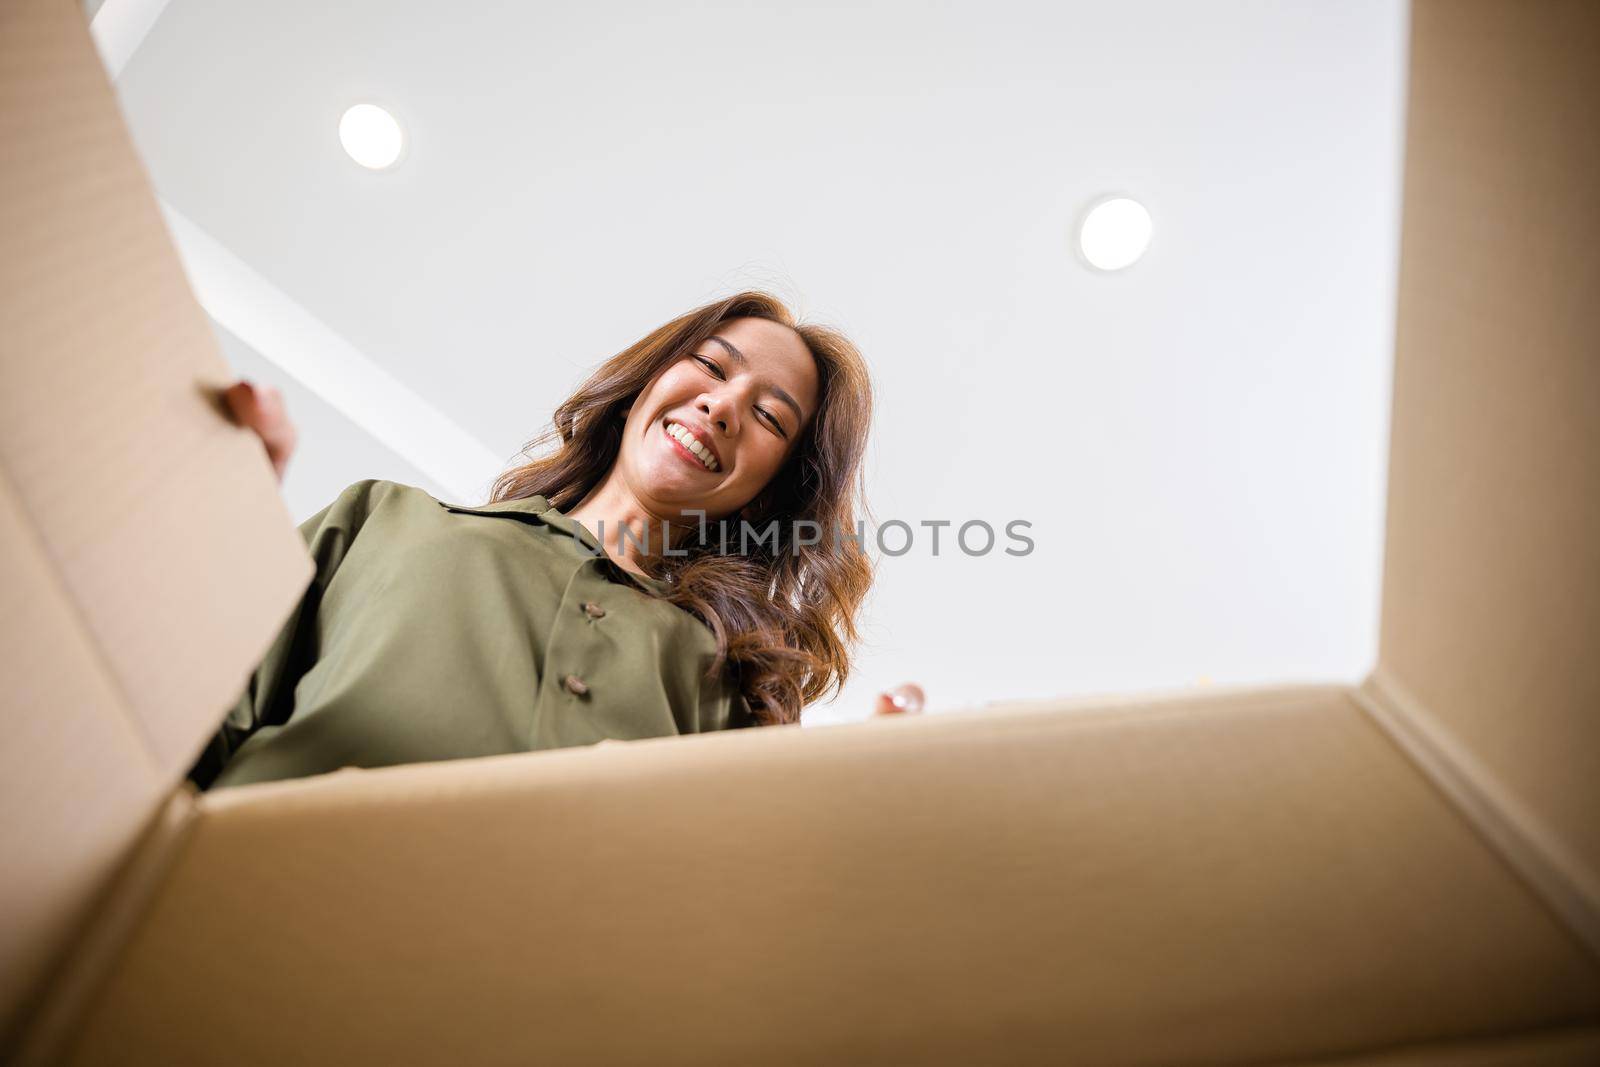 Happy Asian young woman opening carton box from internet store order shopping online by Sorapop